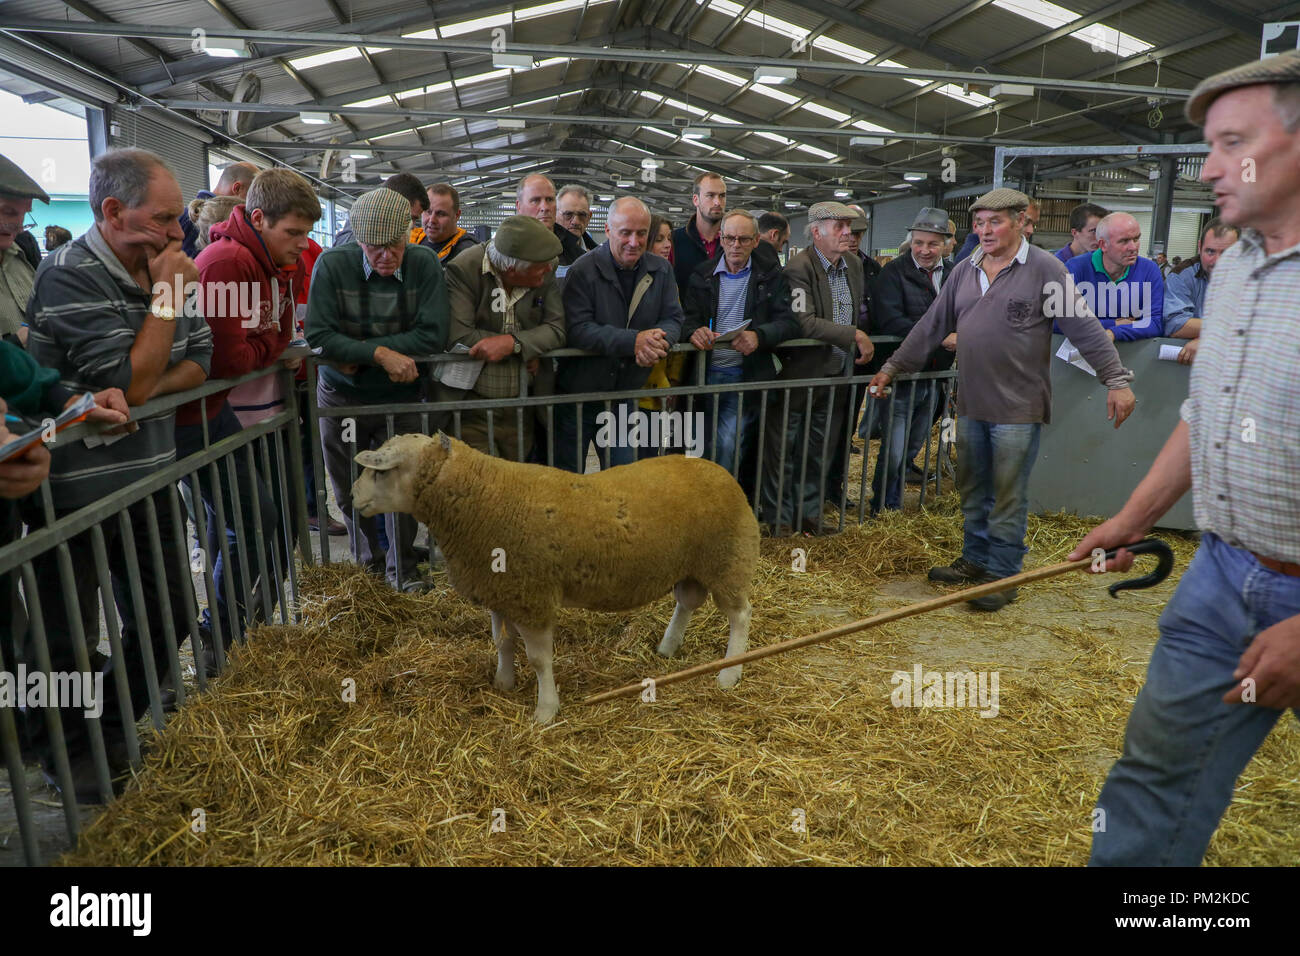 National Sheep Association Ram Sale,Royal Welsh Showground, Llanelwedd,  near Builth Wells, Powys, Mid Wales, UK. 17th September 2018. An estimated 5000 head of rams were auctioned today at the 40th annual National Sheep Association Ram sale, reported to be the largest Ram sale in Europe,  which took place today Royal Welsh Showground, Llanelwedd, Wales. Credit: Haydn Denman/Alamy Live News Stock Photo